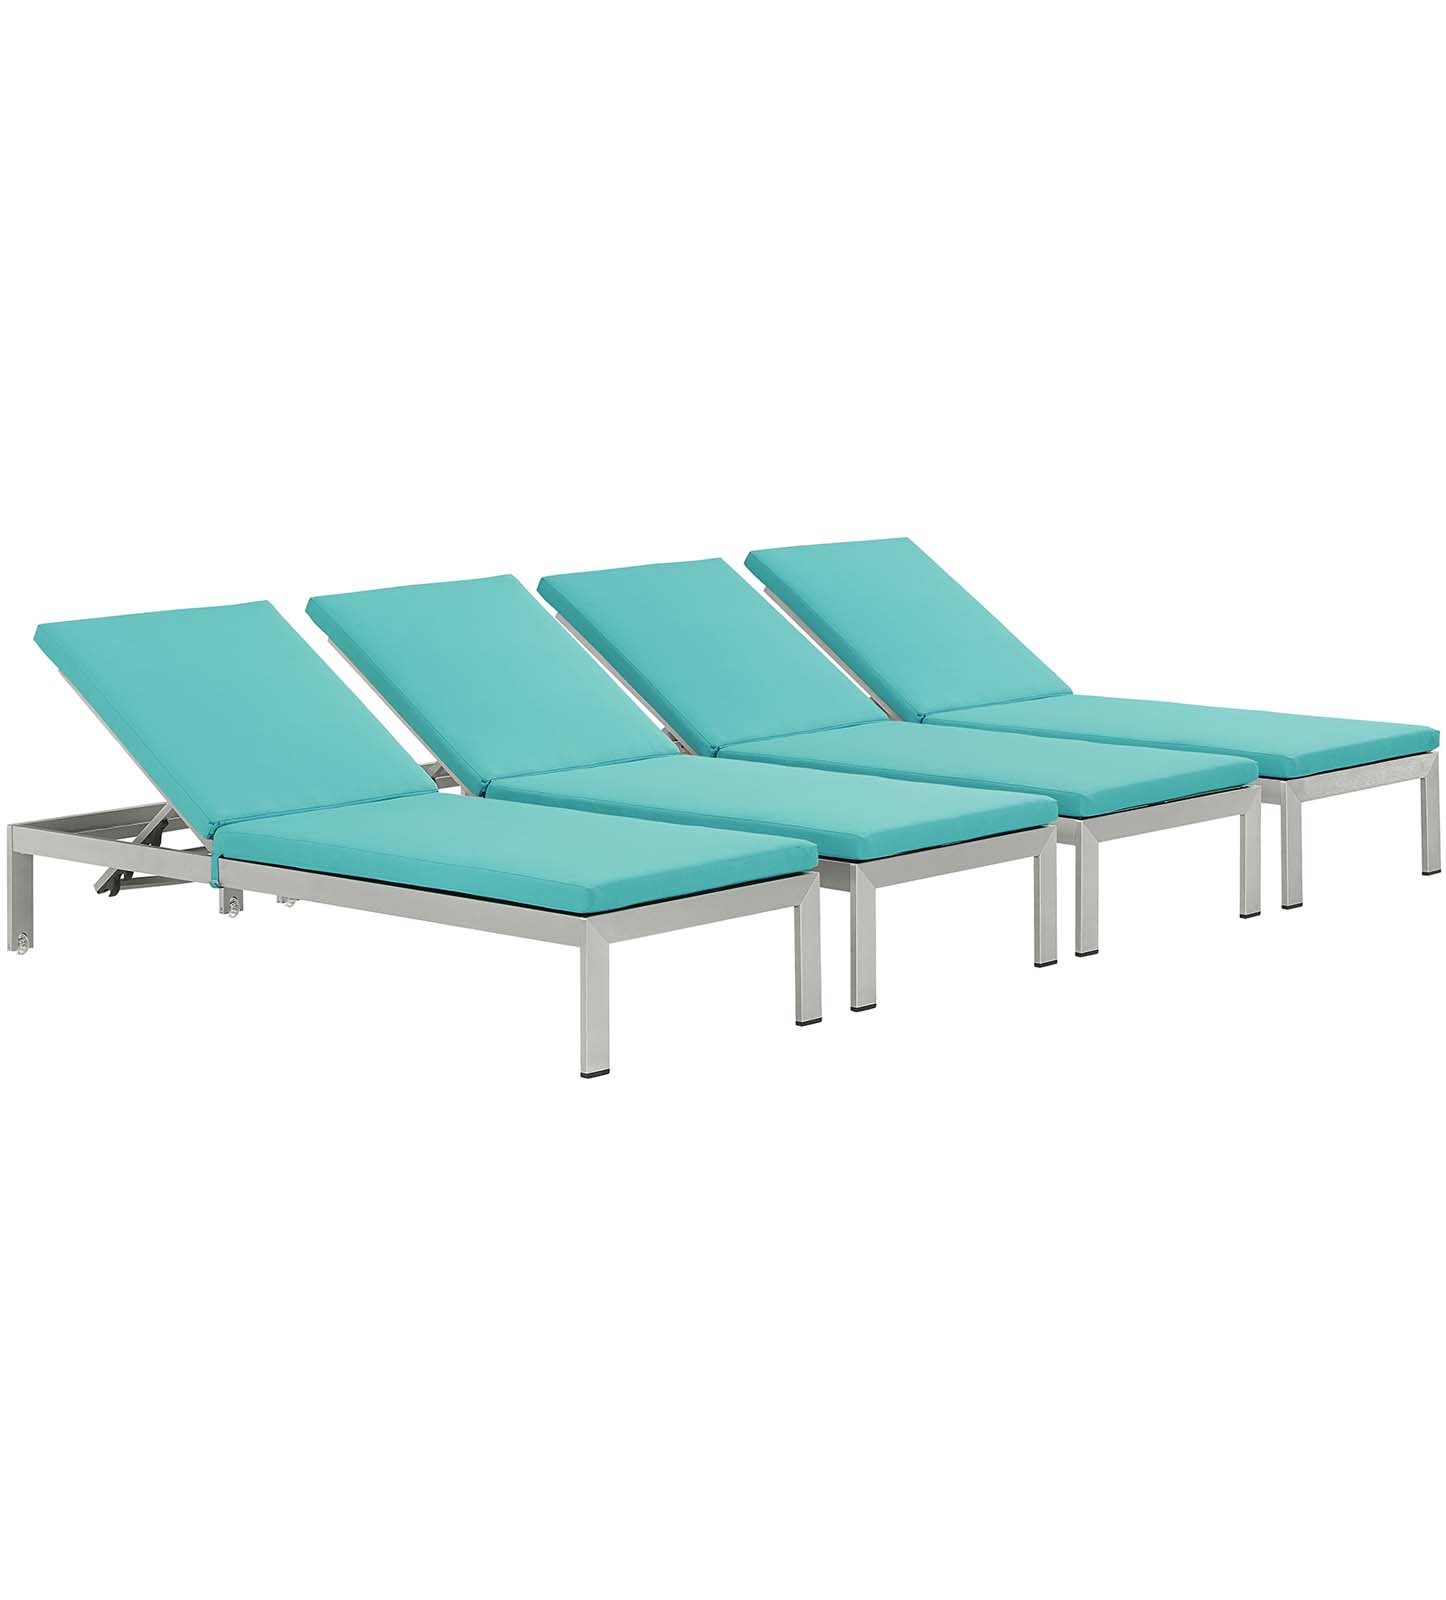 Modern Contemporary Urban Design Outdoor Patio Balcony Chaise Lounge Chair ( Set of 4), Blue, Aluminum - image 1 of 6